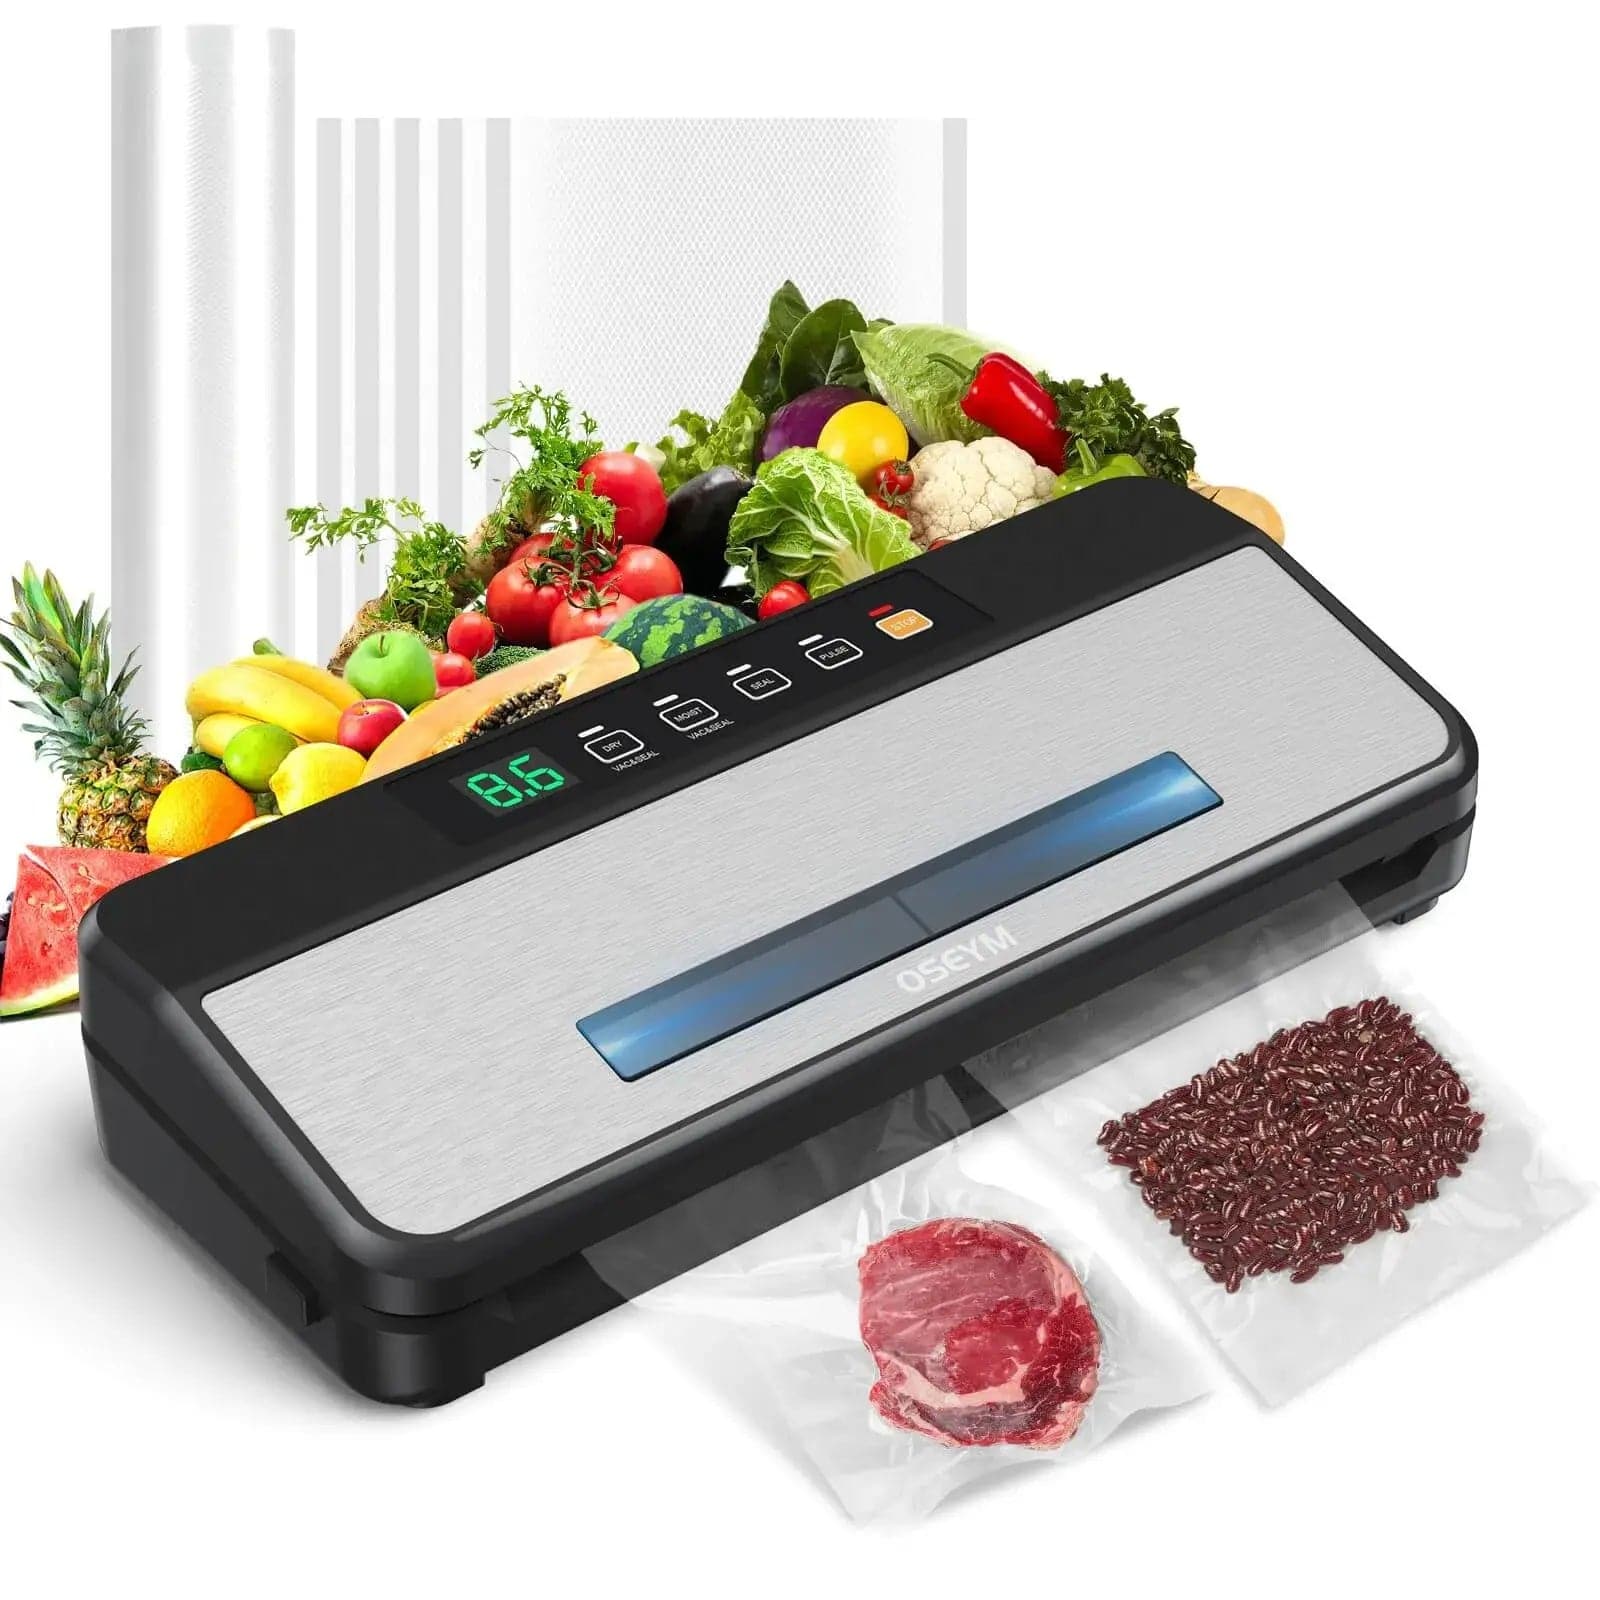 AOSION Vacuum Sealer Machine,Automatic Food Sealer for Food,Food Vacuum  Sealer Automatic Air Sealing System for Food Storage Dry and Moist Food  Modes